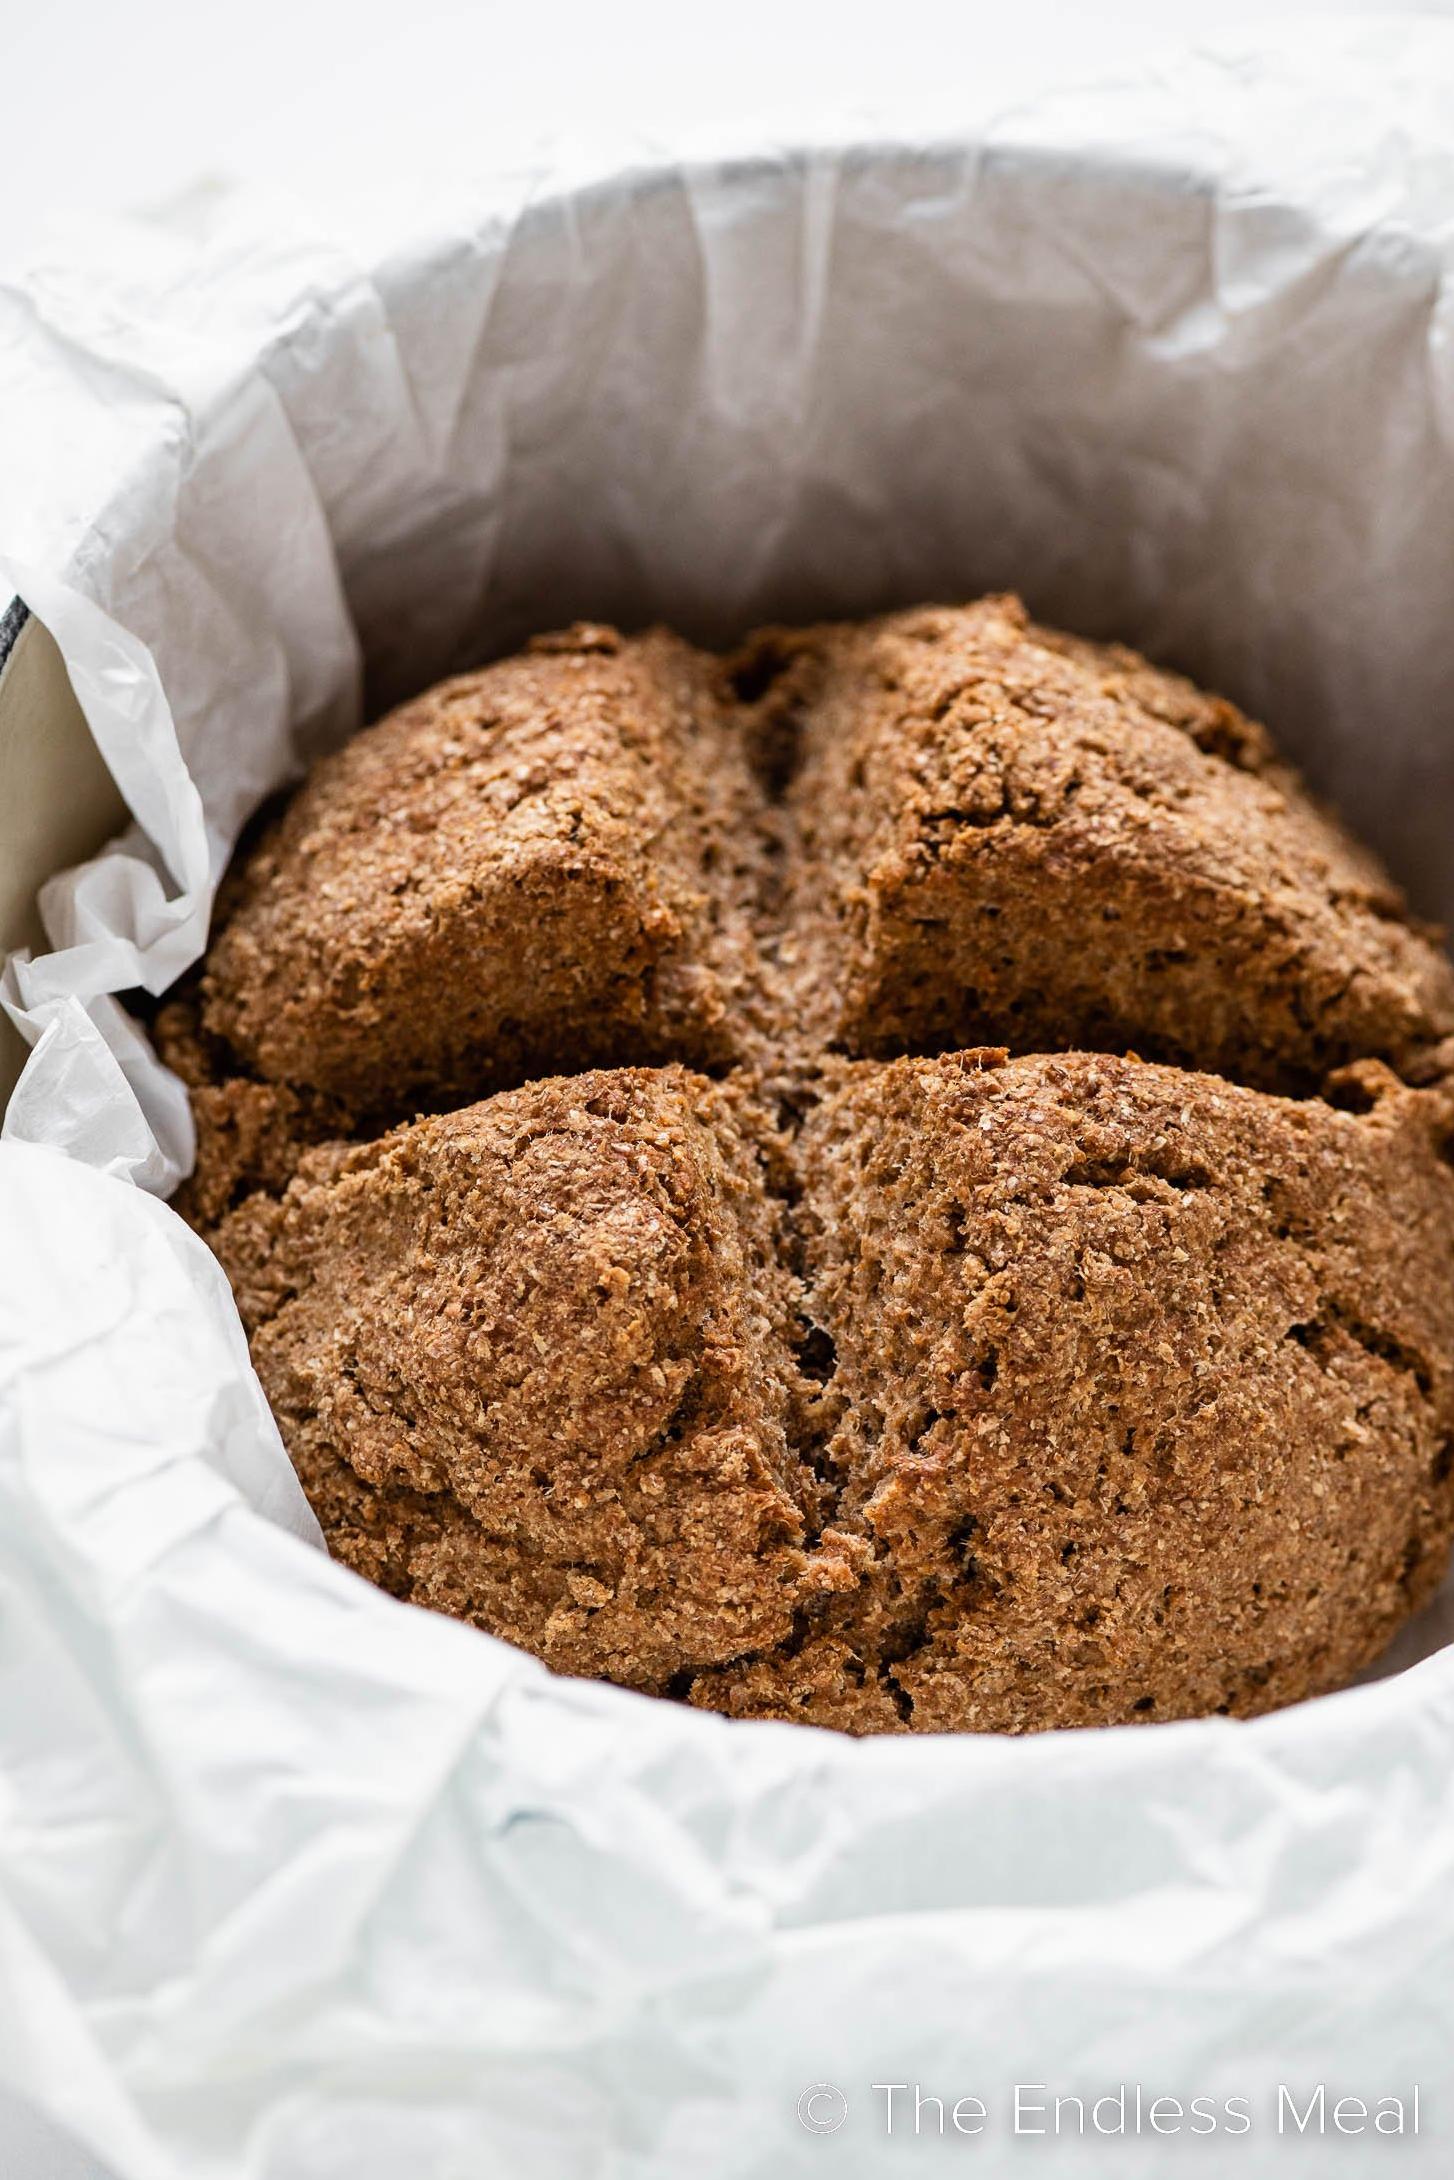  Irish Soda Bread is a simple quick bread that is perfect on its own or as a side during a meal